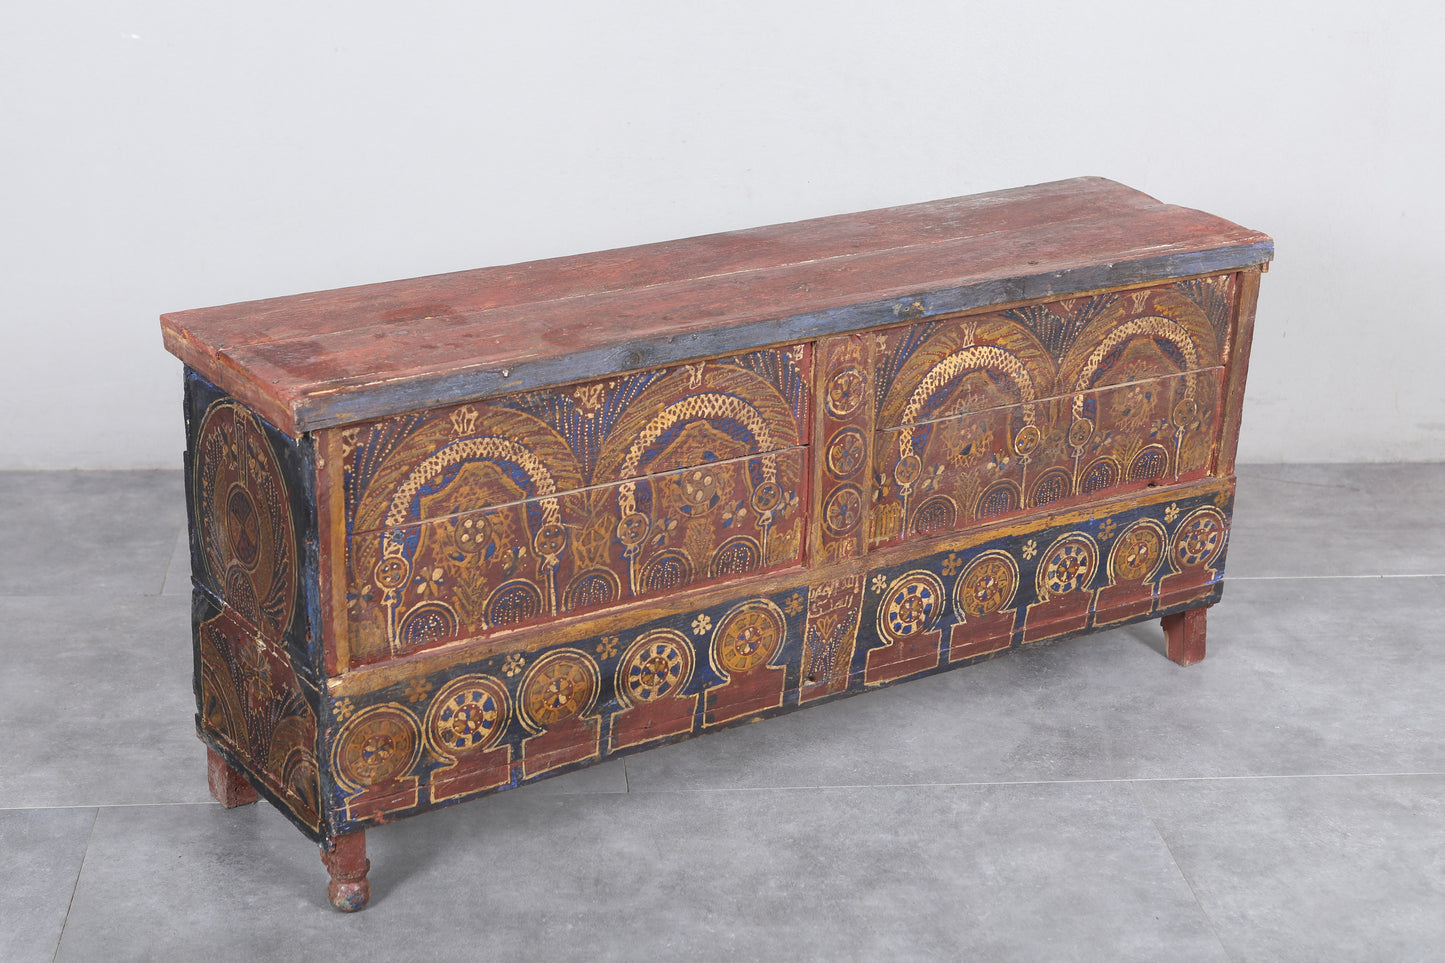 Vintage Moroccan chest  H 23.2 inches x W 51.1 inches x D 13.7 inches